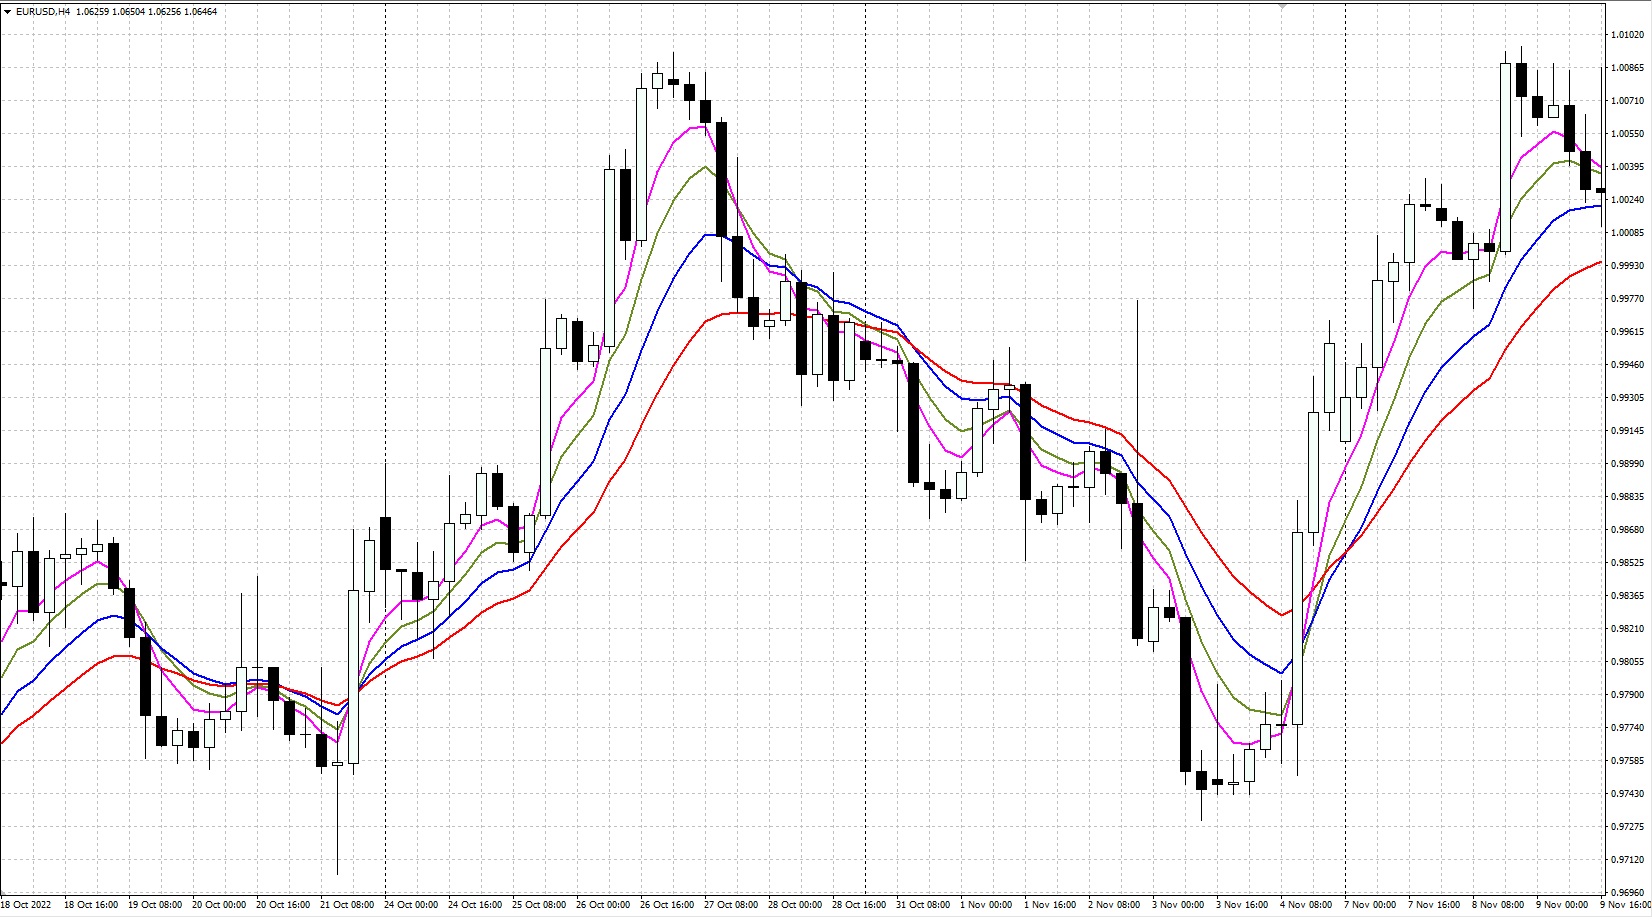 Four Moving Average indicators on the price chart